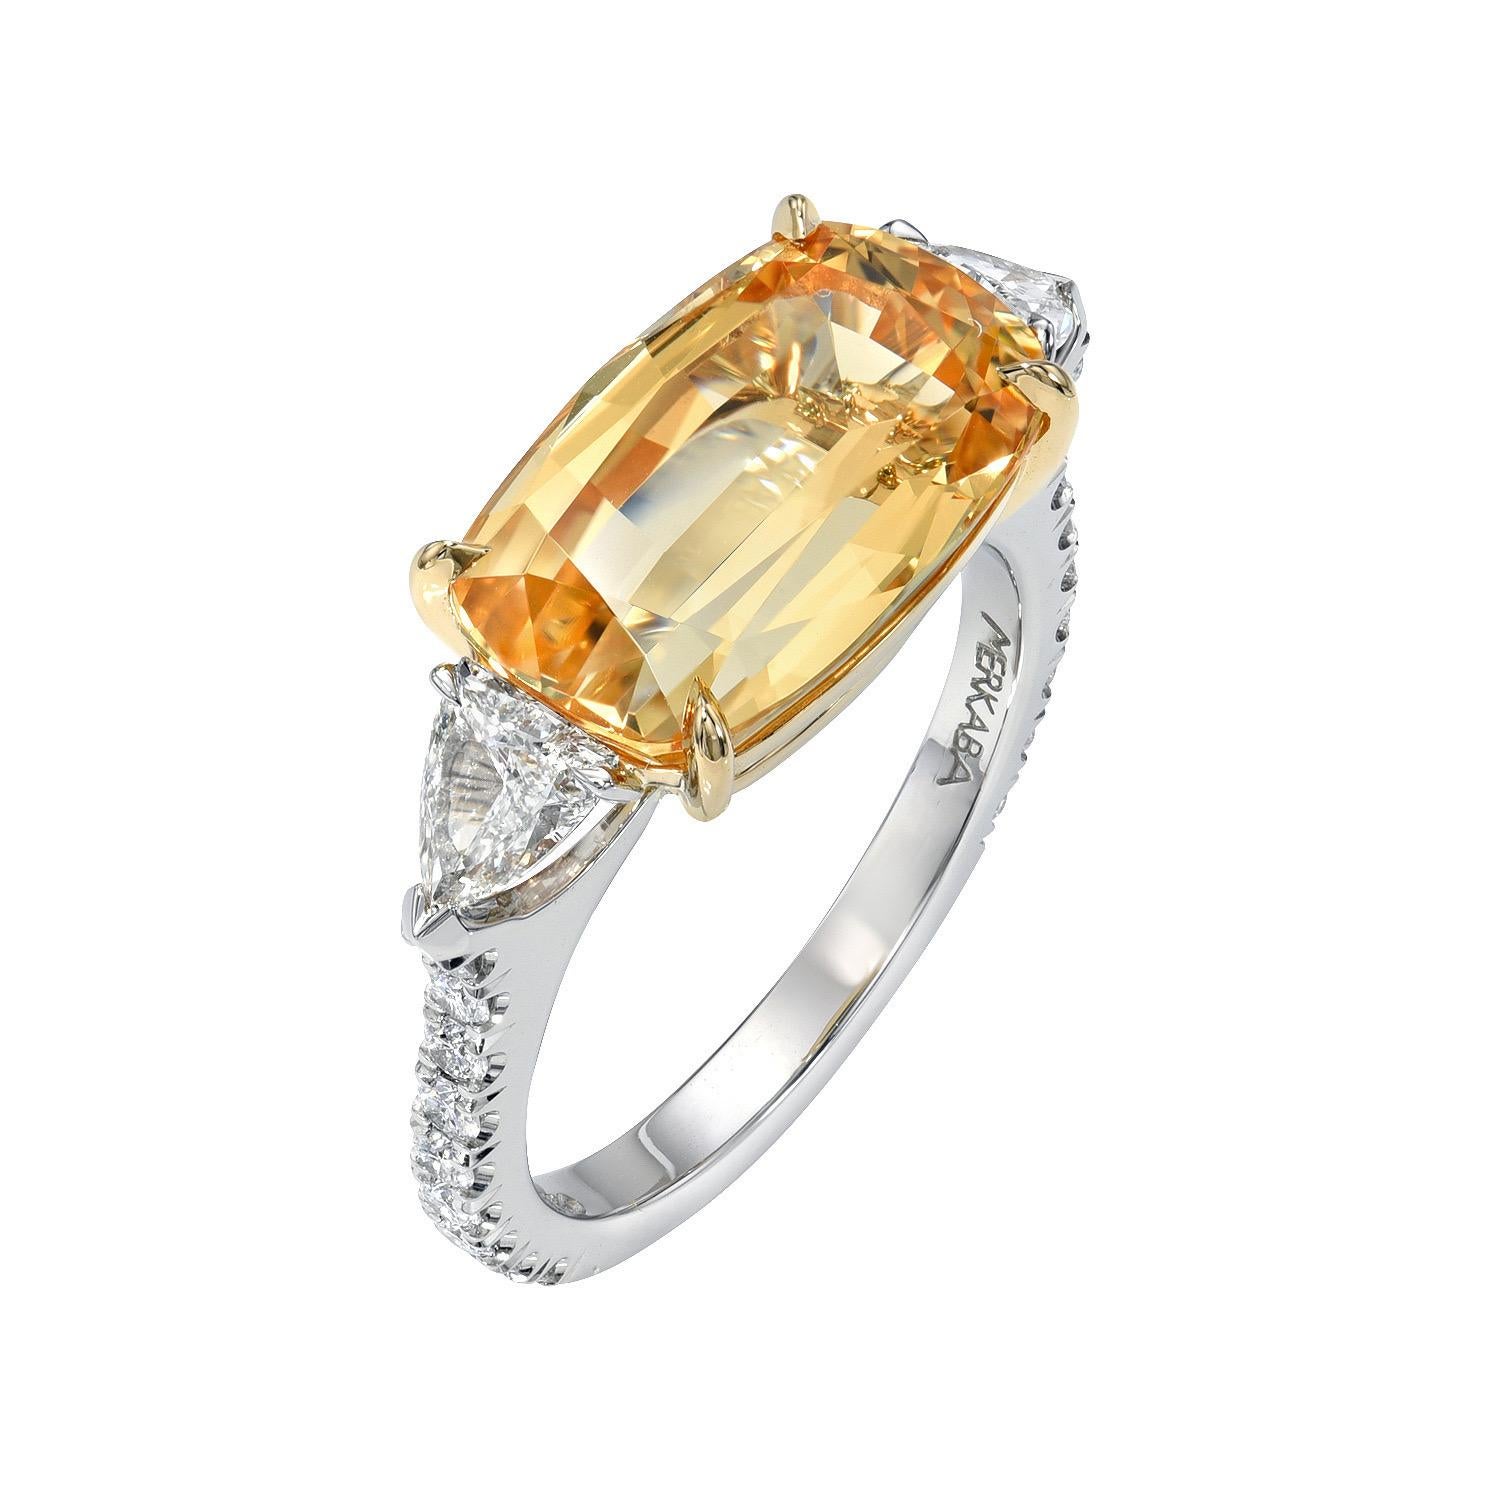 Sensational 6.59 carat Imperial Topaz, elongated cushion, platinum and 18K yellow gold ring, flanked by a pair of 0.57 carat, G/VS1, shield diamonds, and decorated with a total of 0.39 carat round brilliant collection diamonds.
Ring size 6.5.